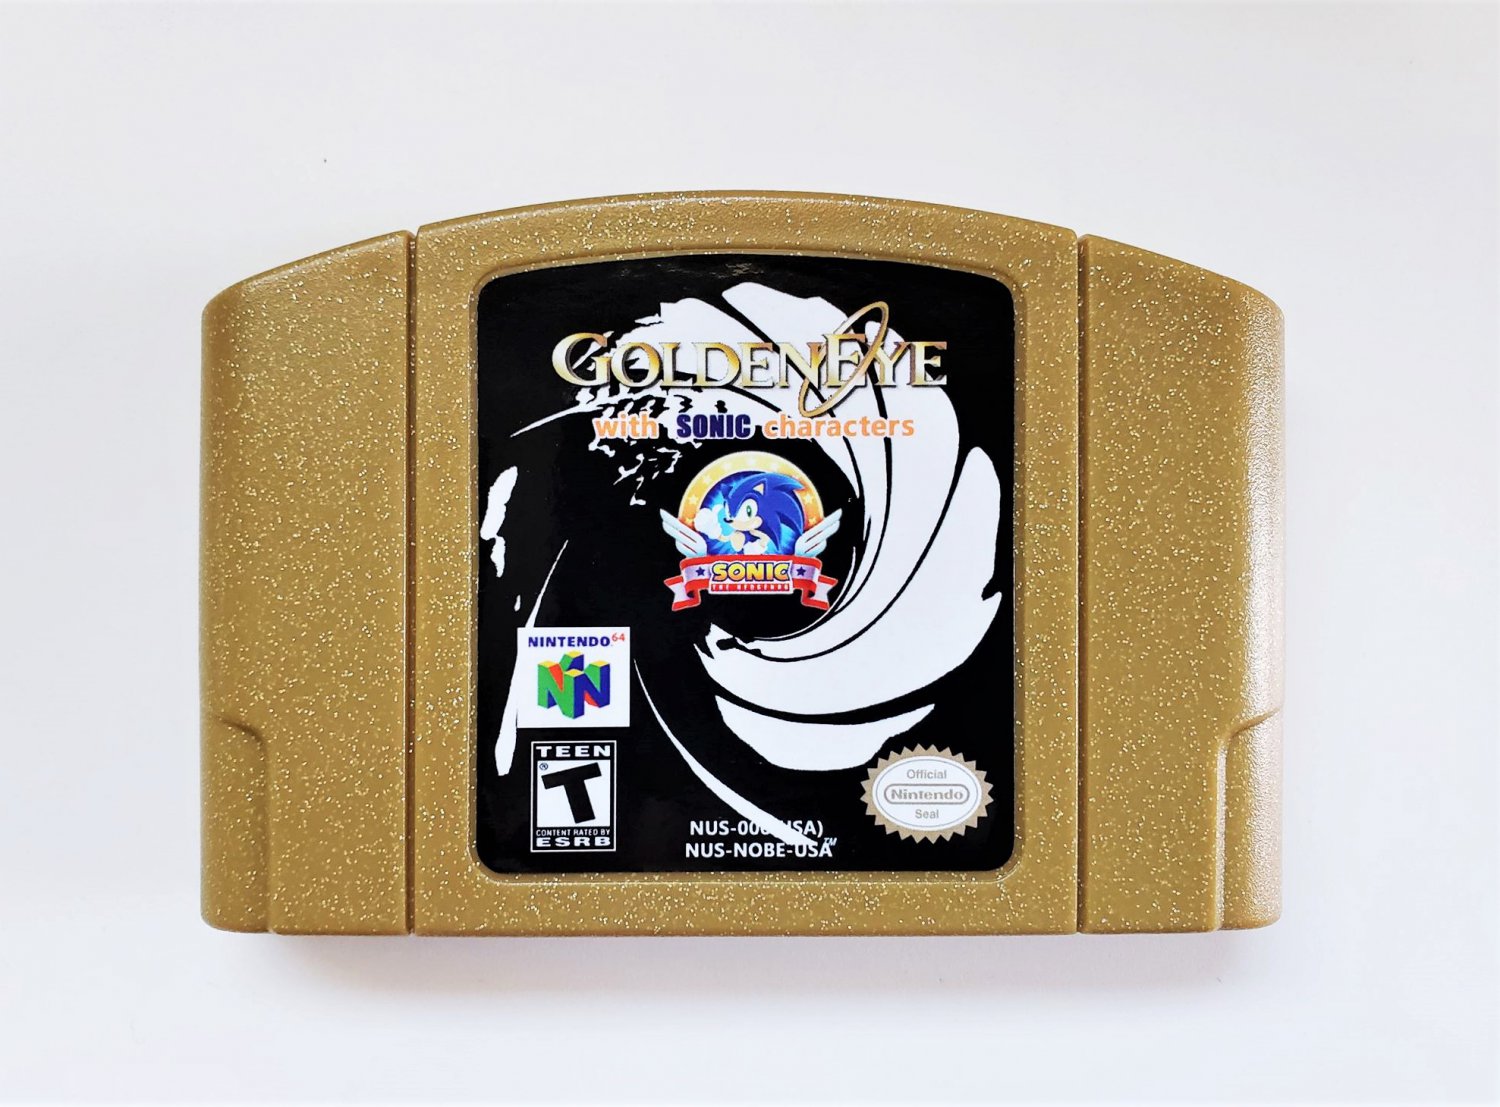 N64 Golden Eye 007 with Sonic Characters ROM Hack - Nintendo 64 -  Needs Expansion Pak To Play